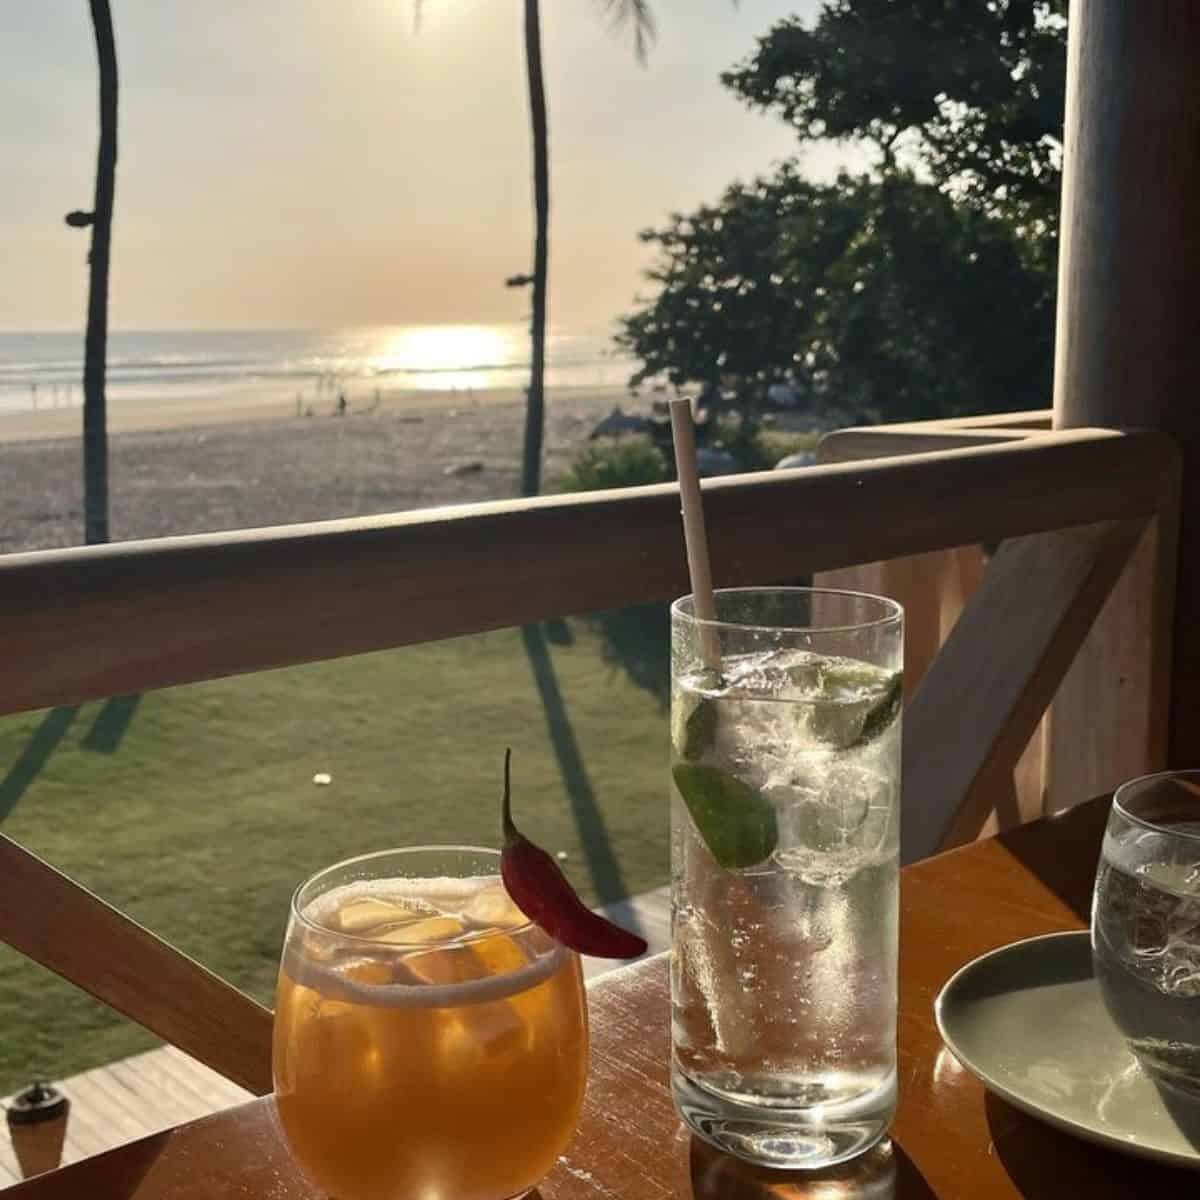 La Lucciola’s two glasses of cocktail drinks filled with ice with a calm beach in front